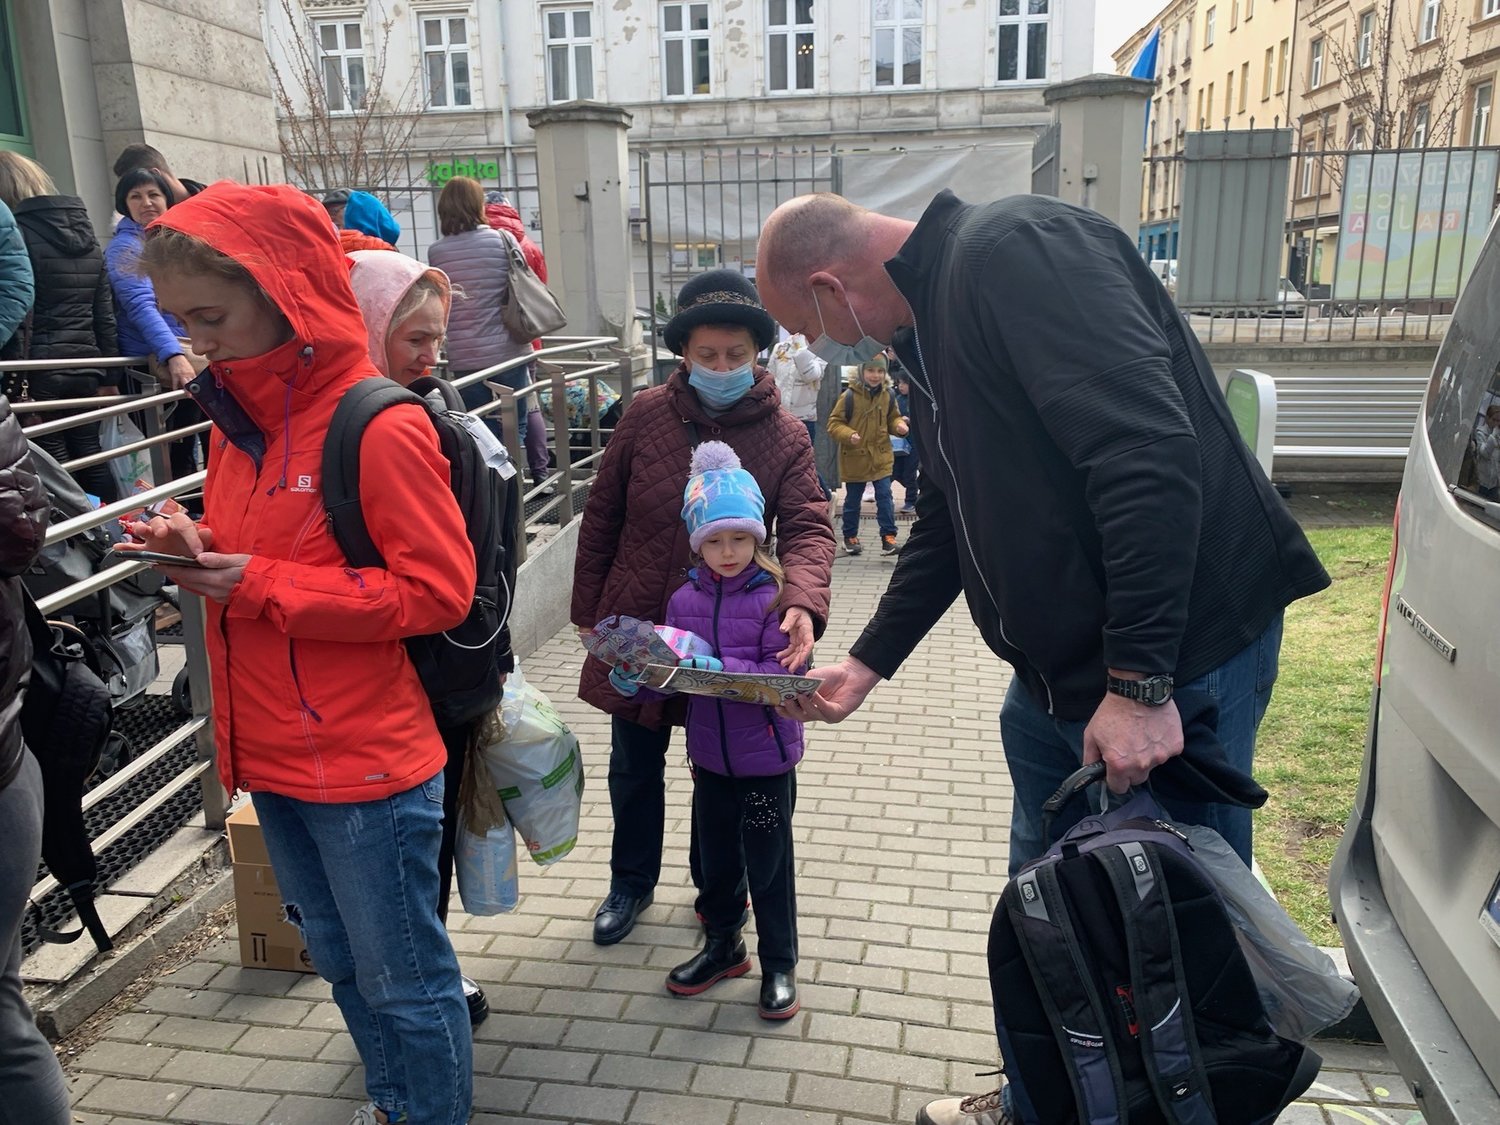 Rabbi Ari Goldstein handed a coloring book to a refugee child arriving at the JCC in Krakow, Poland.